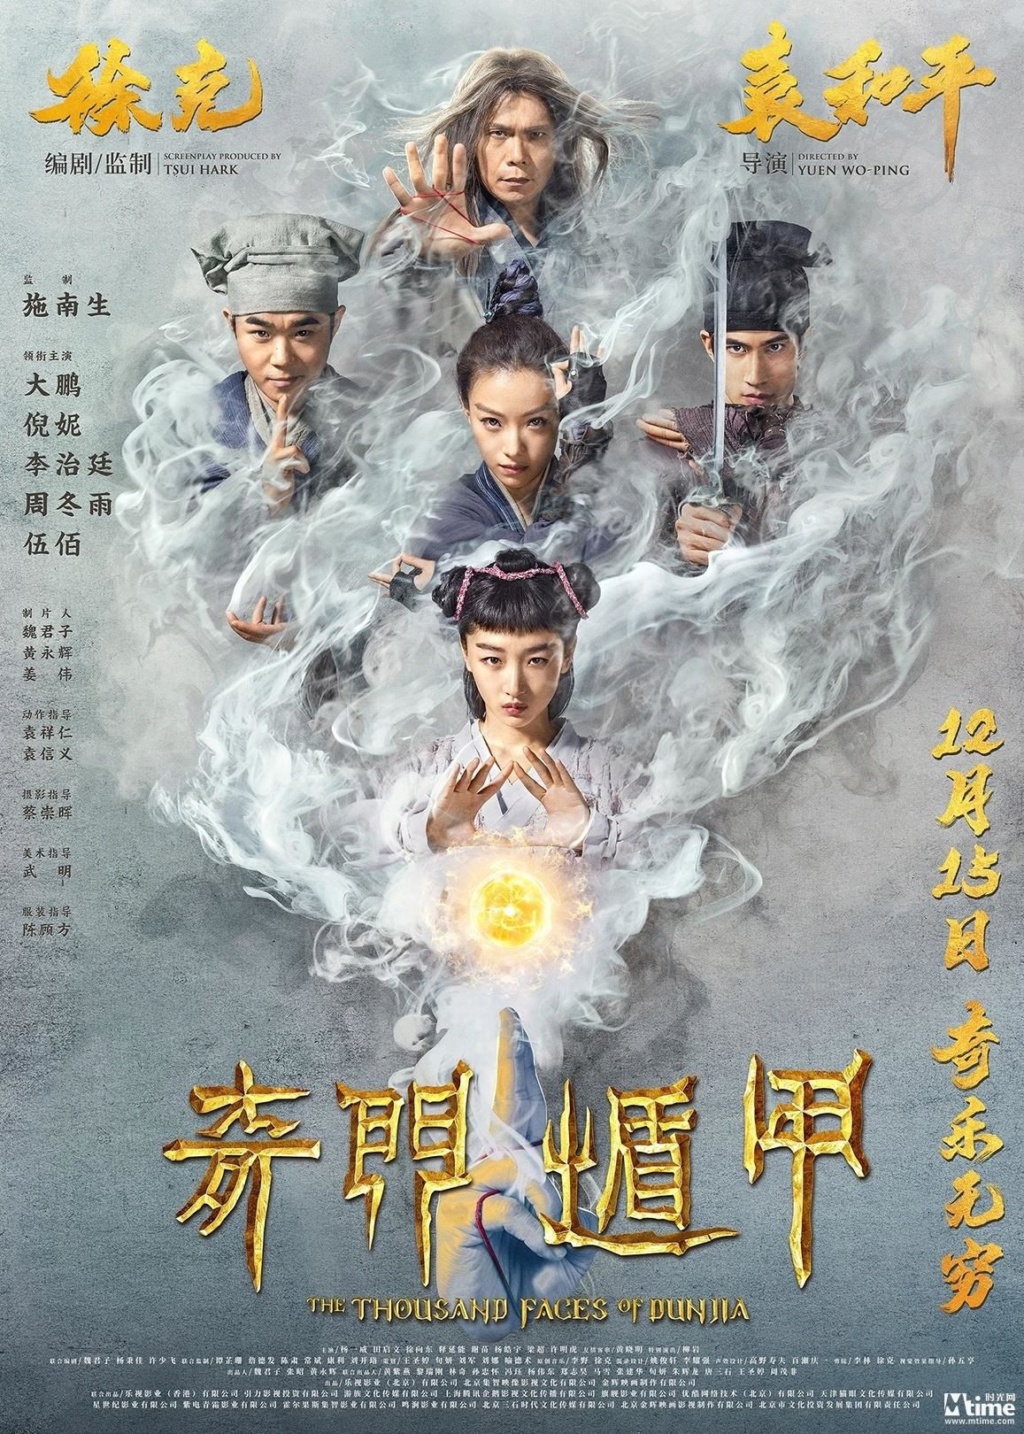 The Thousand Faces Of Dunjia - WEBRiP VOSTFR